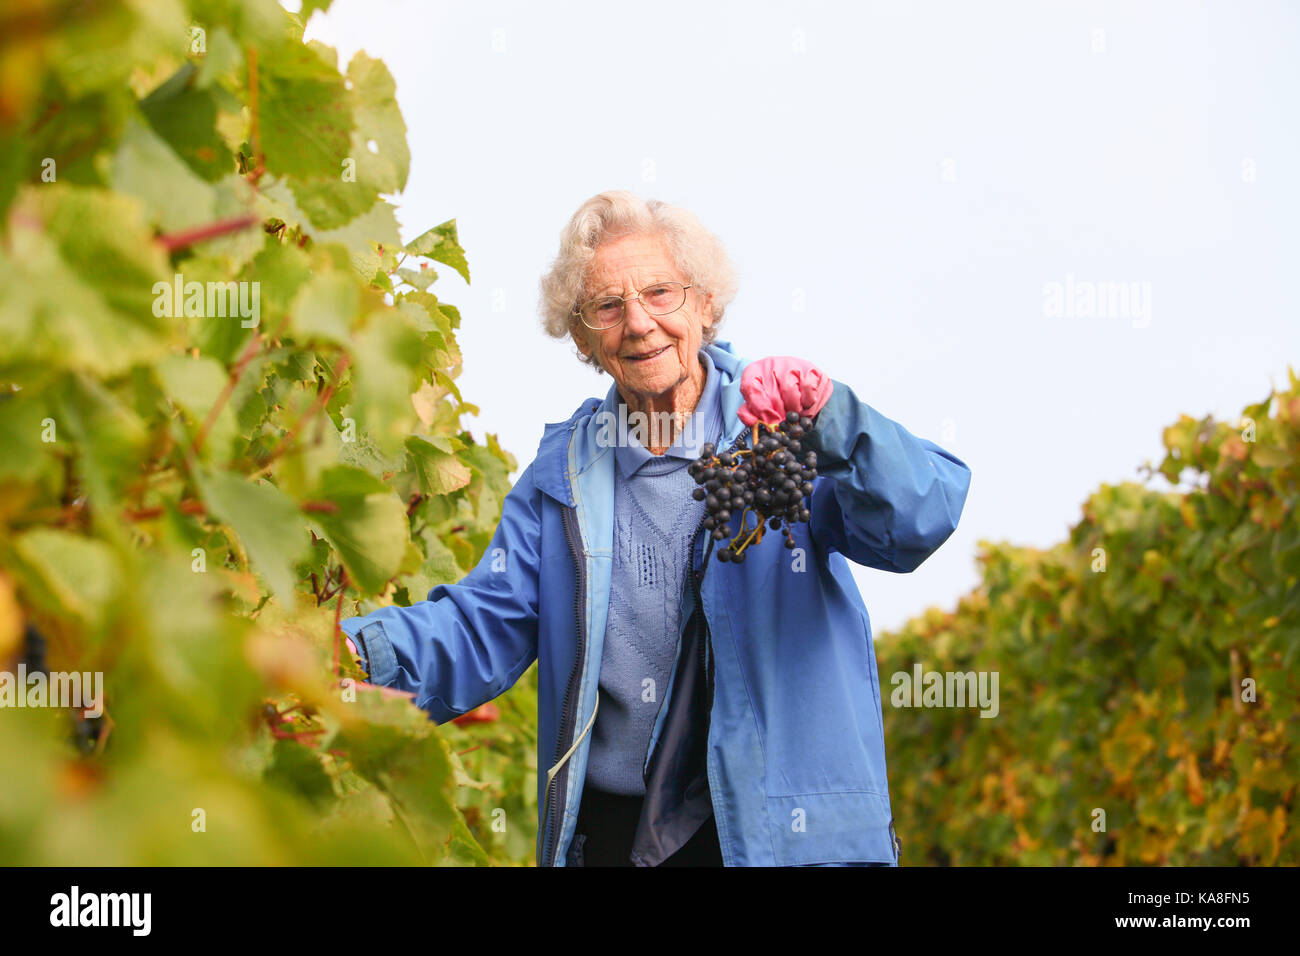 Halfpenny Green, Staffordshire, UK. 26th September, 2017. 96-year-old Ann Hawkins begins her twentieth year as a volunteer grape picker at Halfpenny Green Vineyard, near Wombourne, Staffordshire UK. The vineyard is one of around 500 in England and Wales. This year's crop is relatively unharmed by early cold weather in spring. Peter Lopeman/Alamy Live News Stock Photo